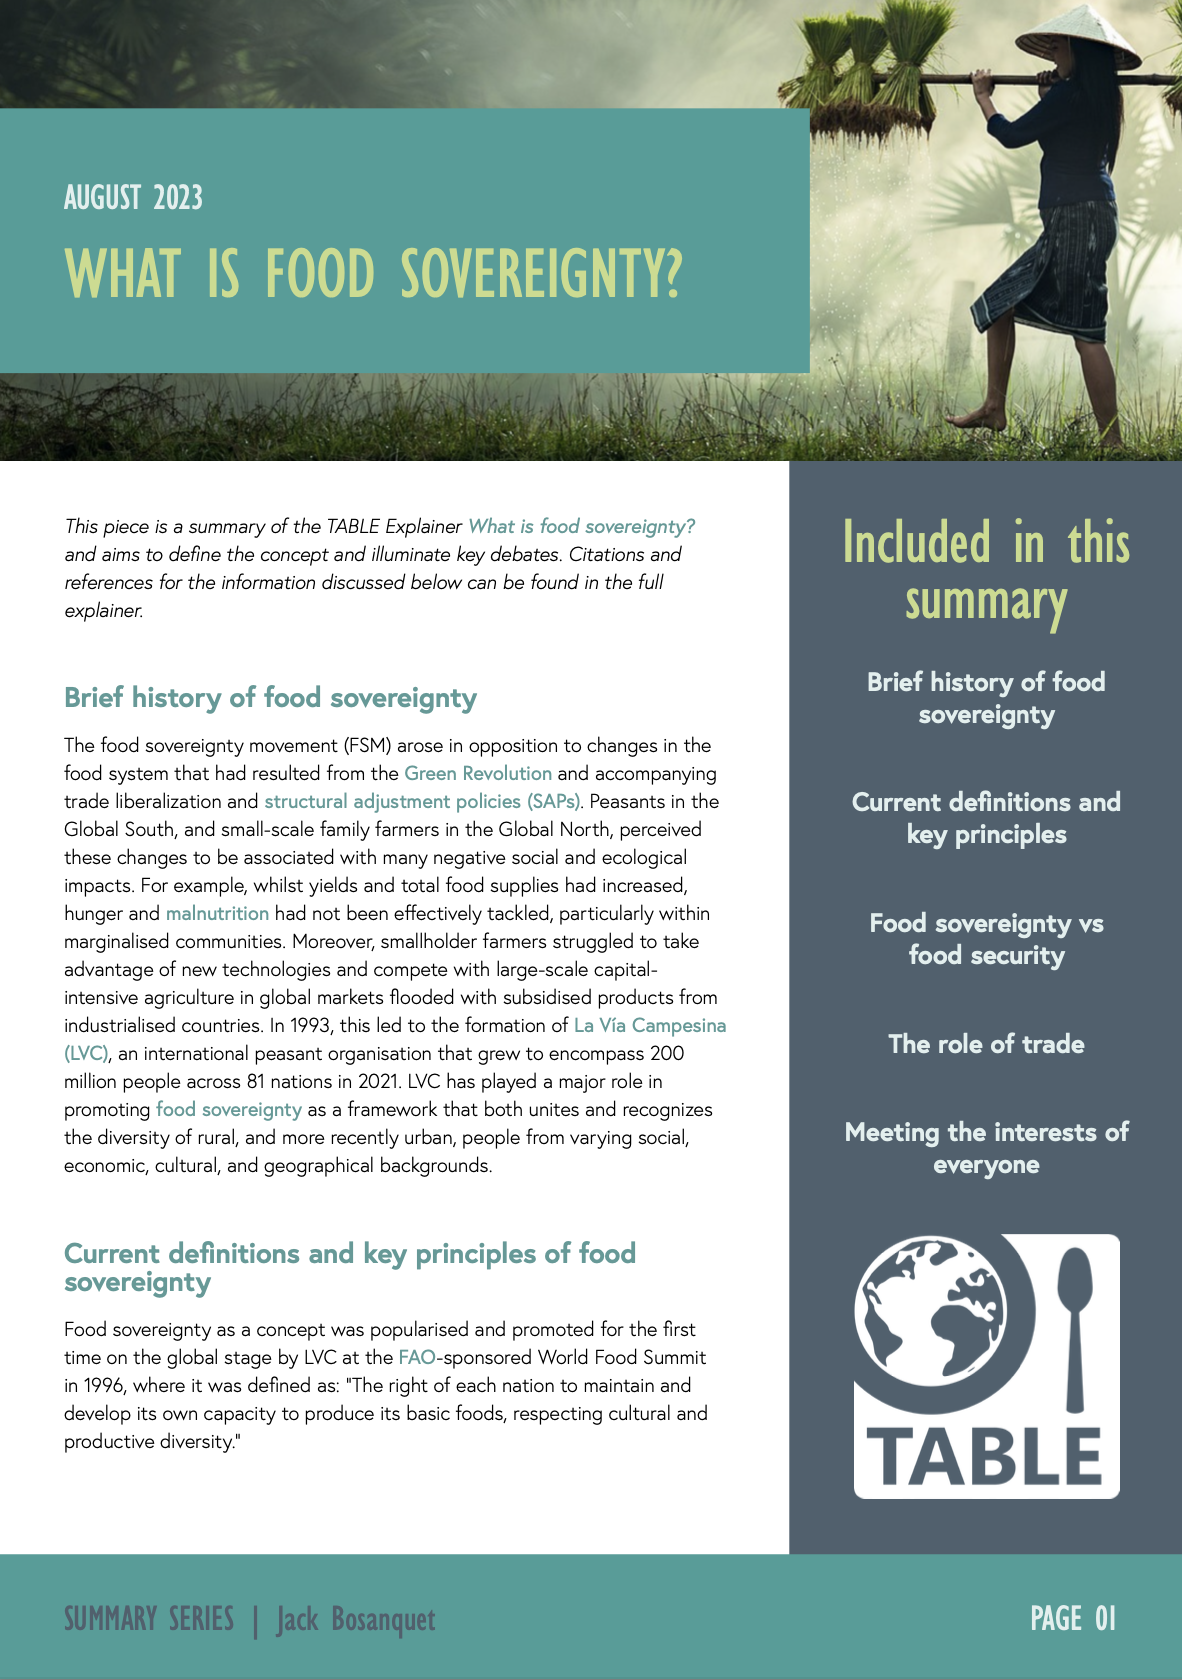 The first page of the explainer summary of 'What is food sovereignty?' published by TABLE